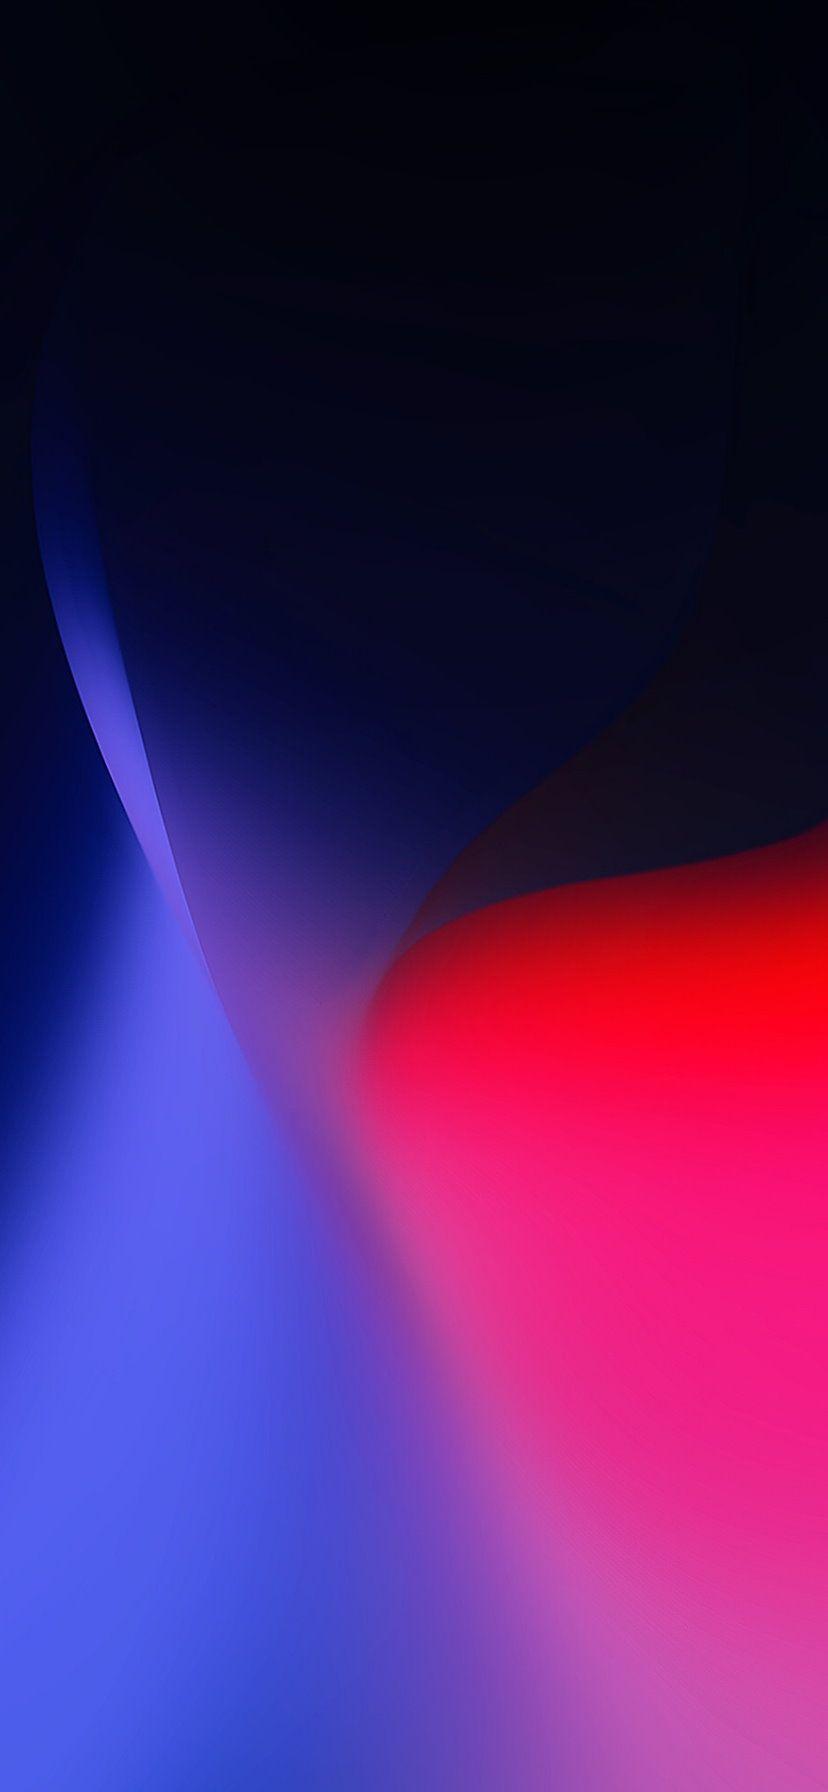 iPhone XR Wallpaper Free iPhone XR Background